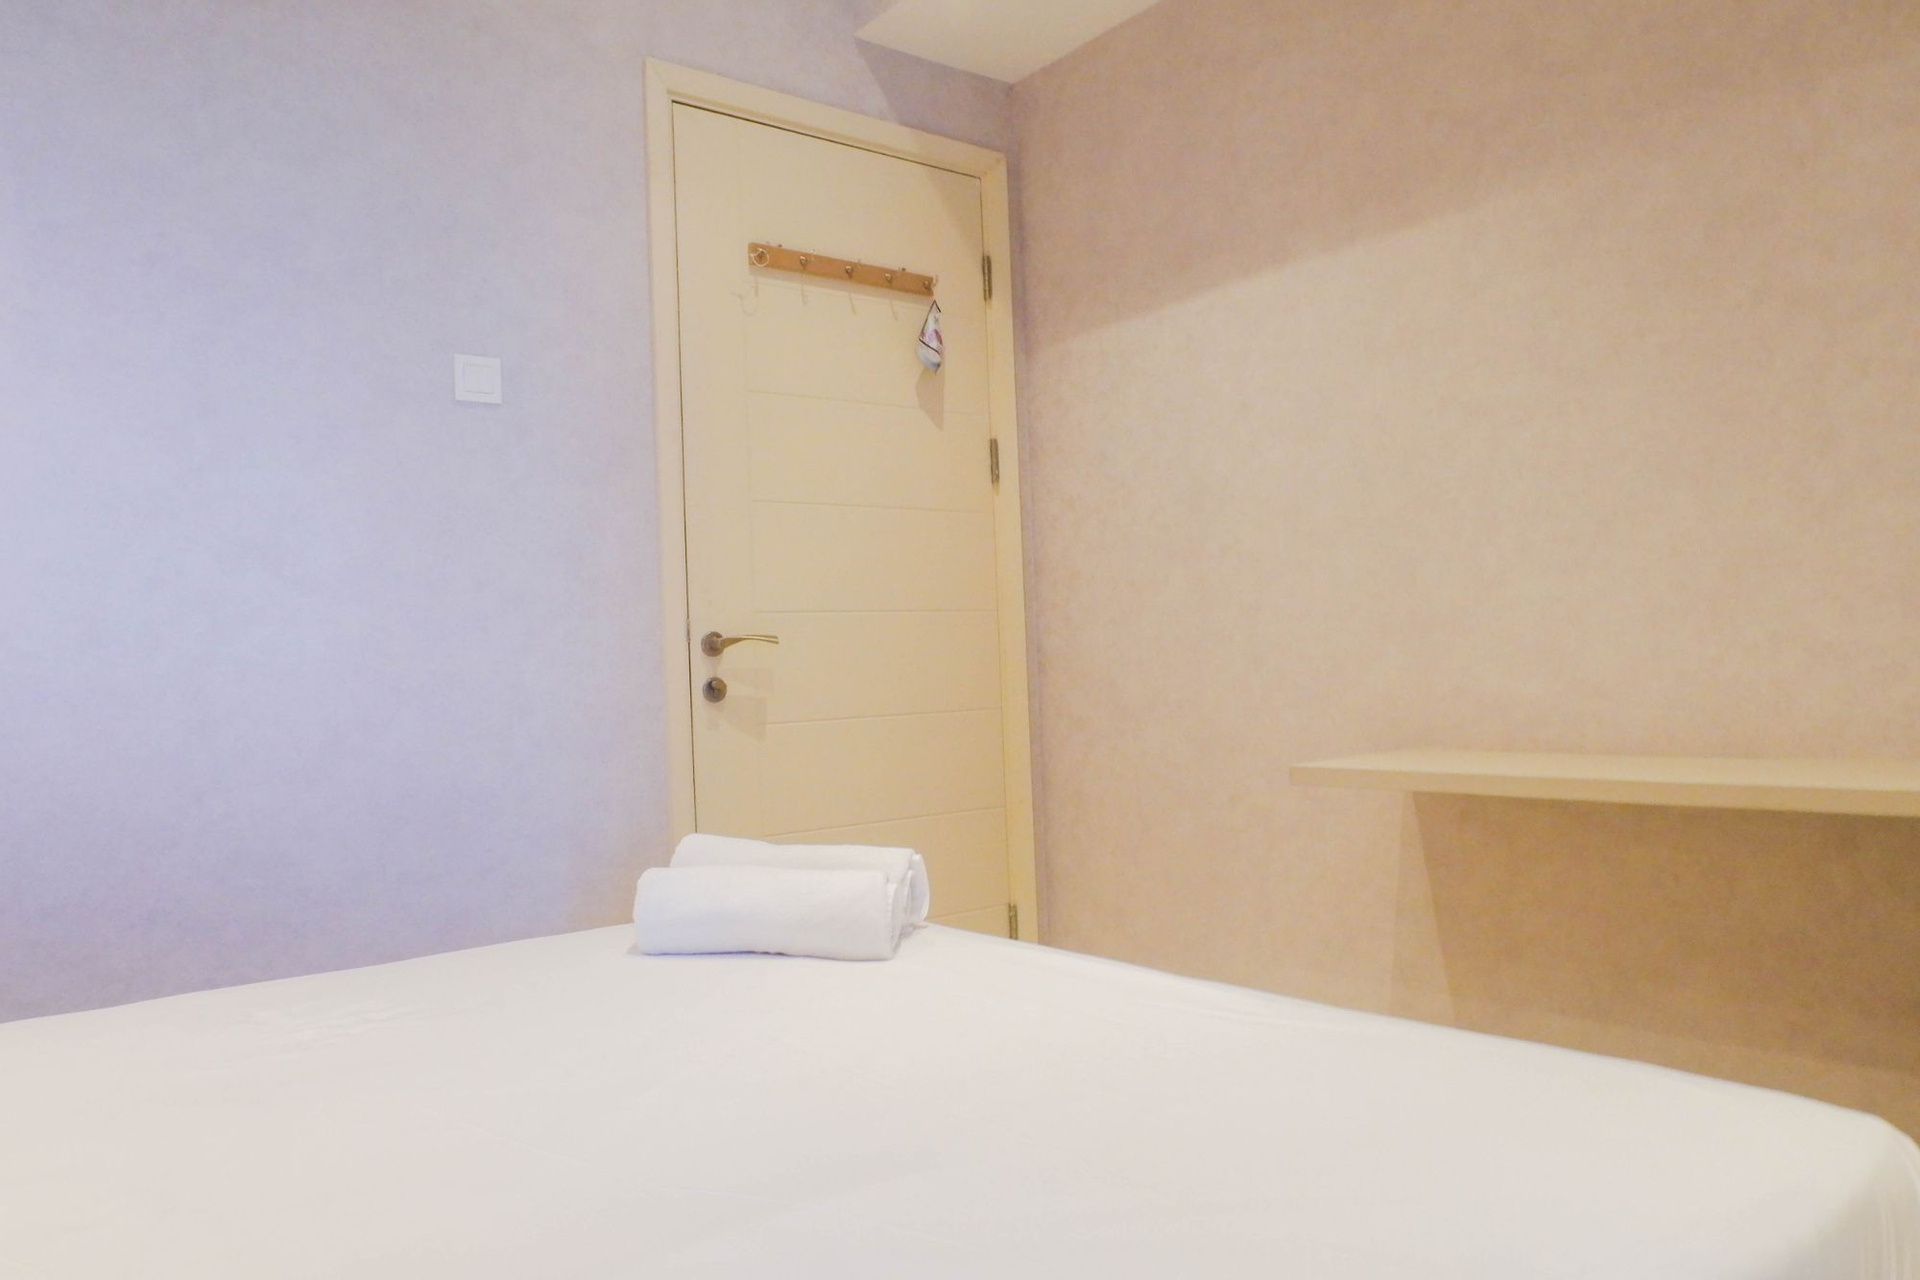 Bedroom 4, Best View Luxurious 2BR Supermall Mansion Apartment Connected to Mall By Travelio, Surabaya